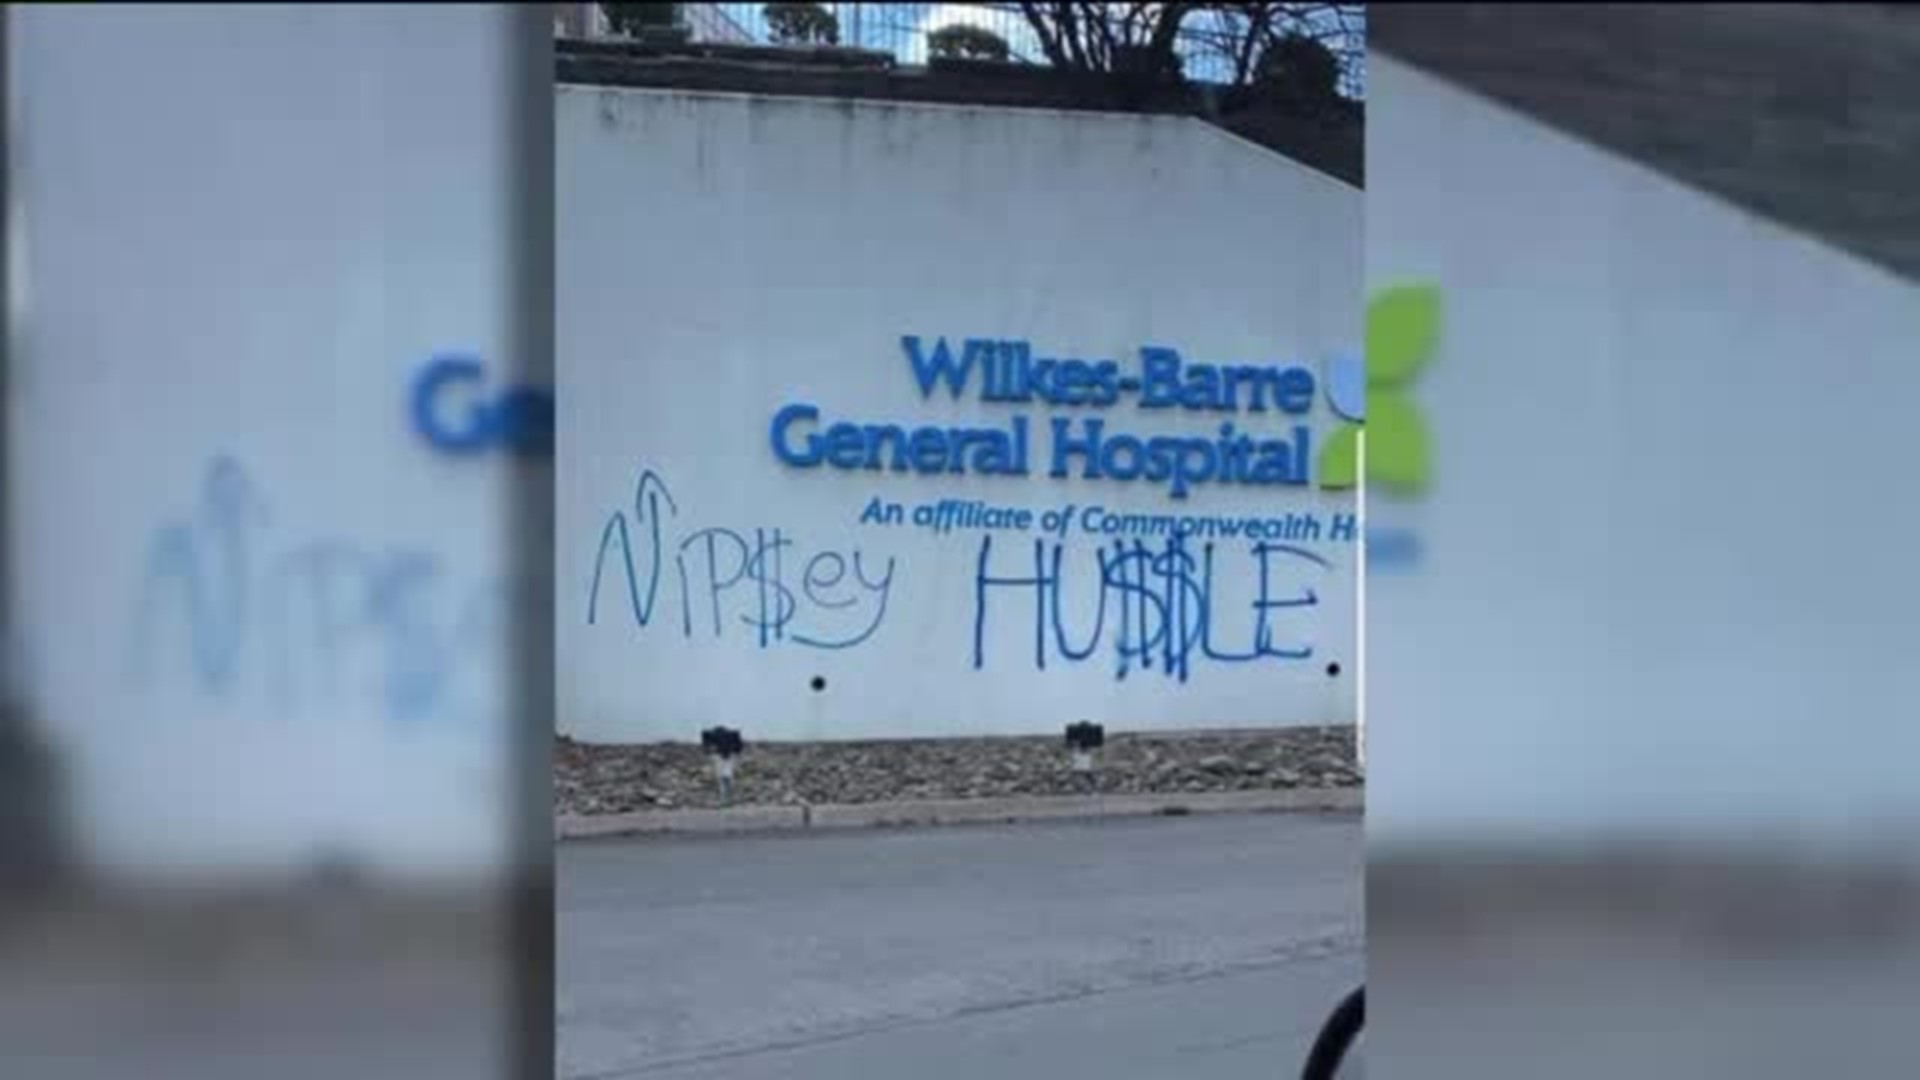 Vandals Wanted After Spray-painting Hospital Sign, Buses with Name of Murdered Rapper and Activist